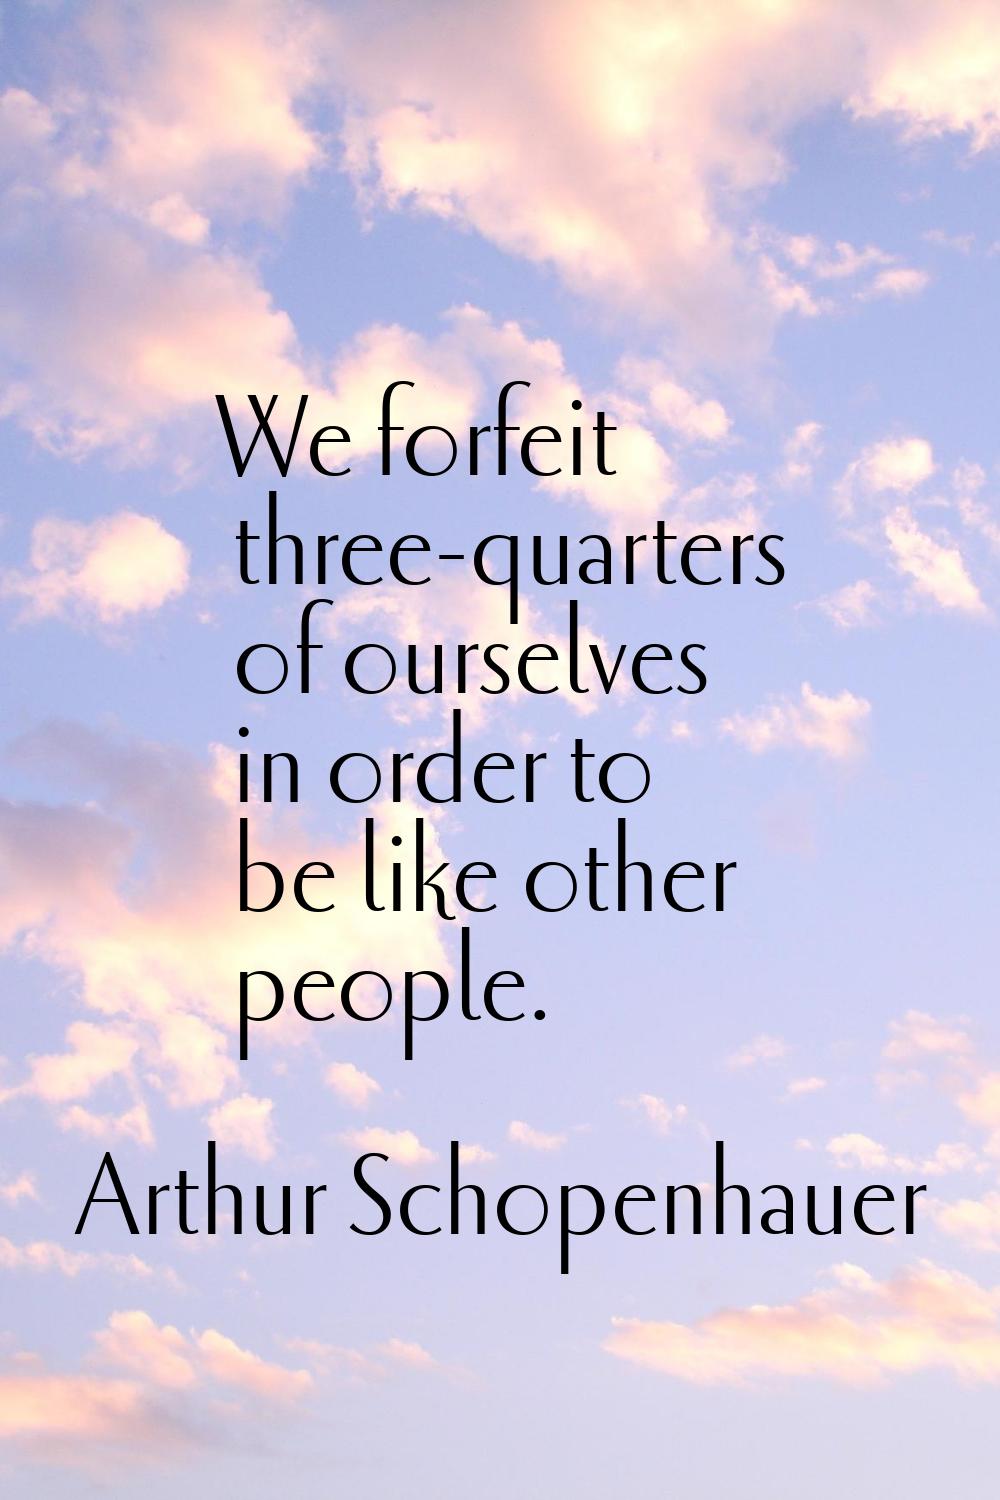 We forfeit three-quarters of ourselves in order to be like other people.